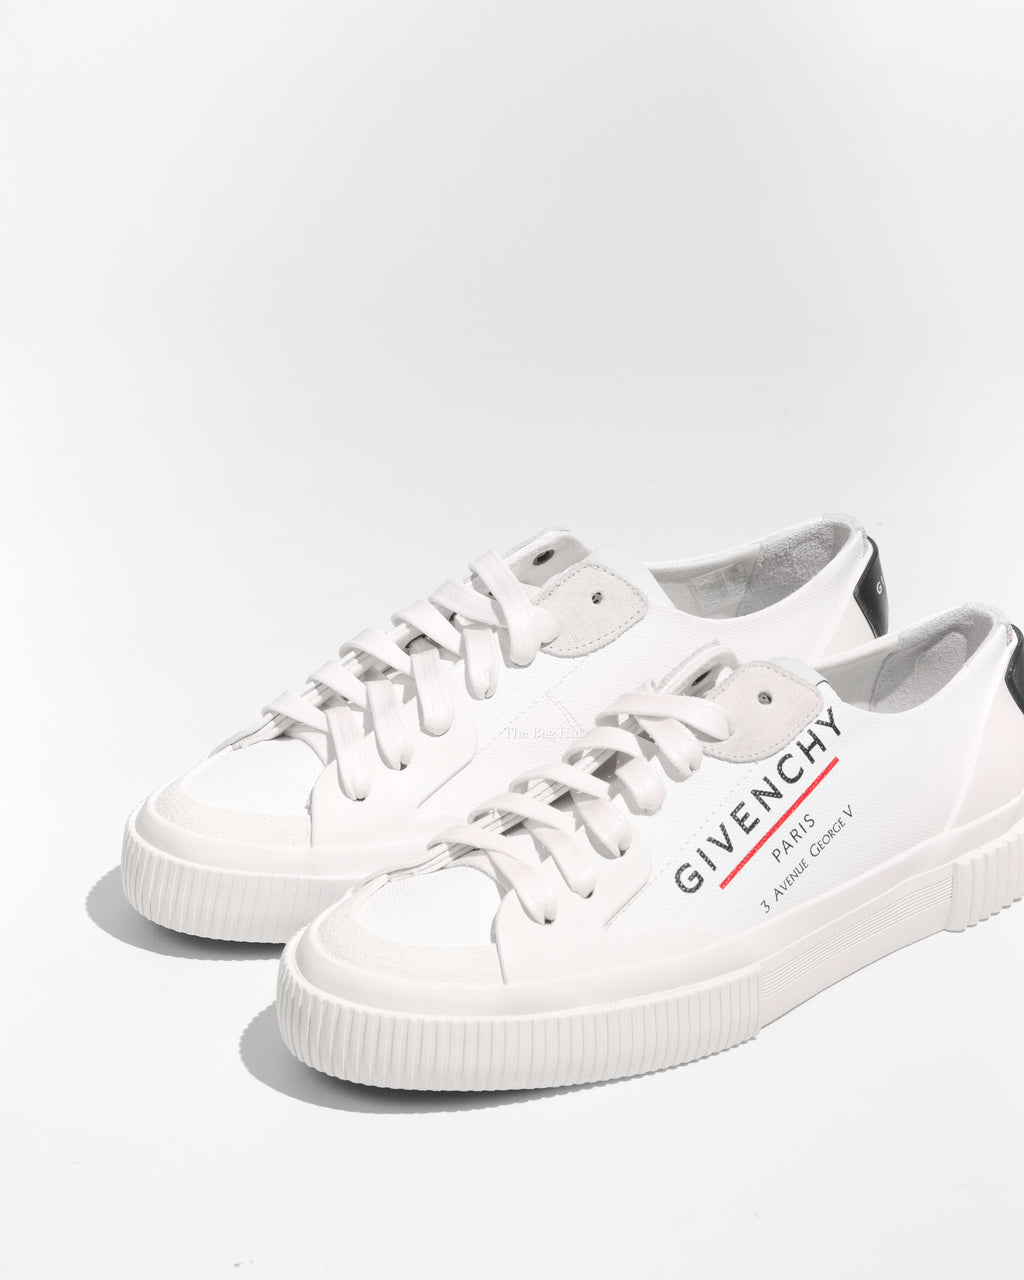 Givenchy White Canvas/Rubber Tennis Light Sneakers Size 37